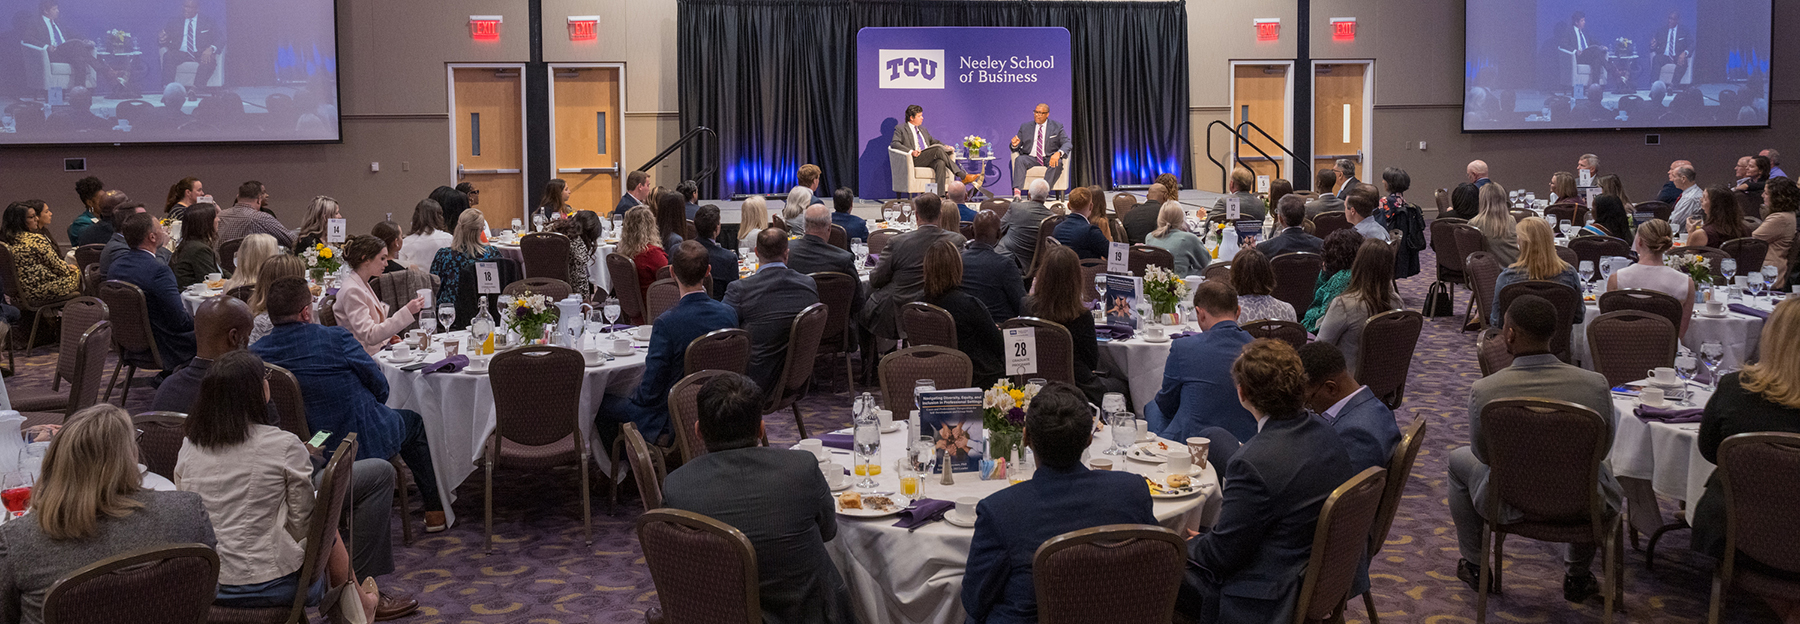 Section Image: Dean Pullin and Key Bouyer on the stage in front of a room full of people at round tables eating breakfast. 